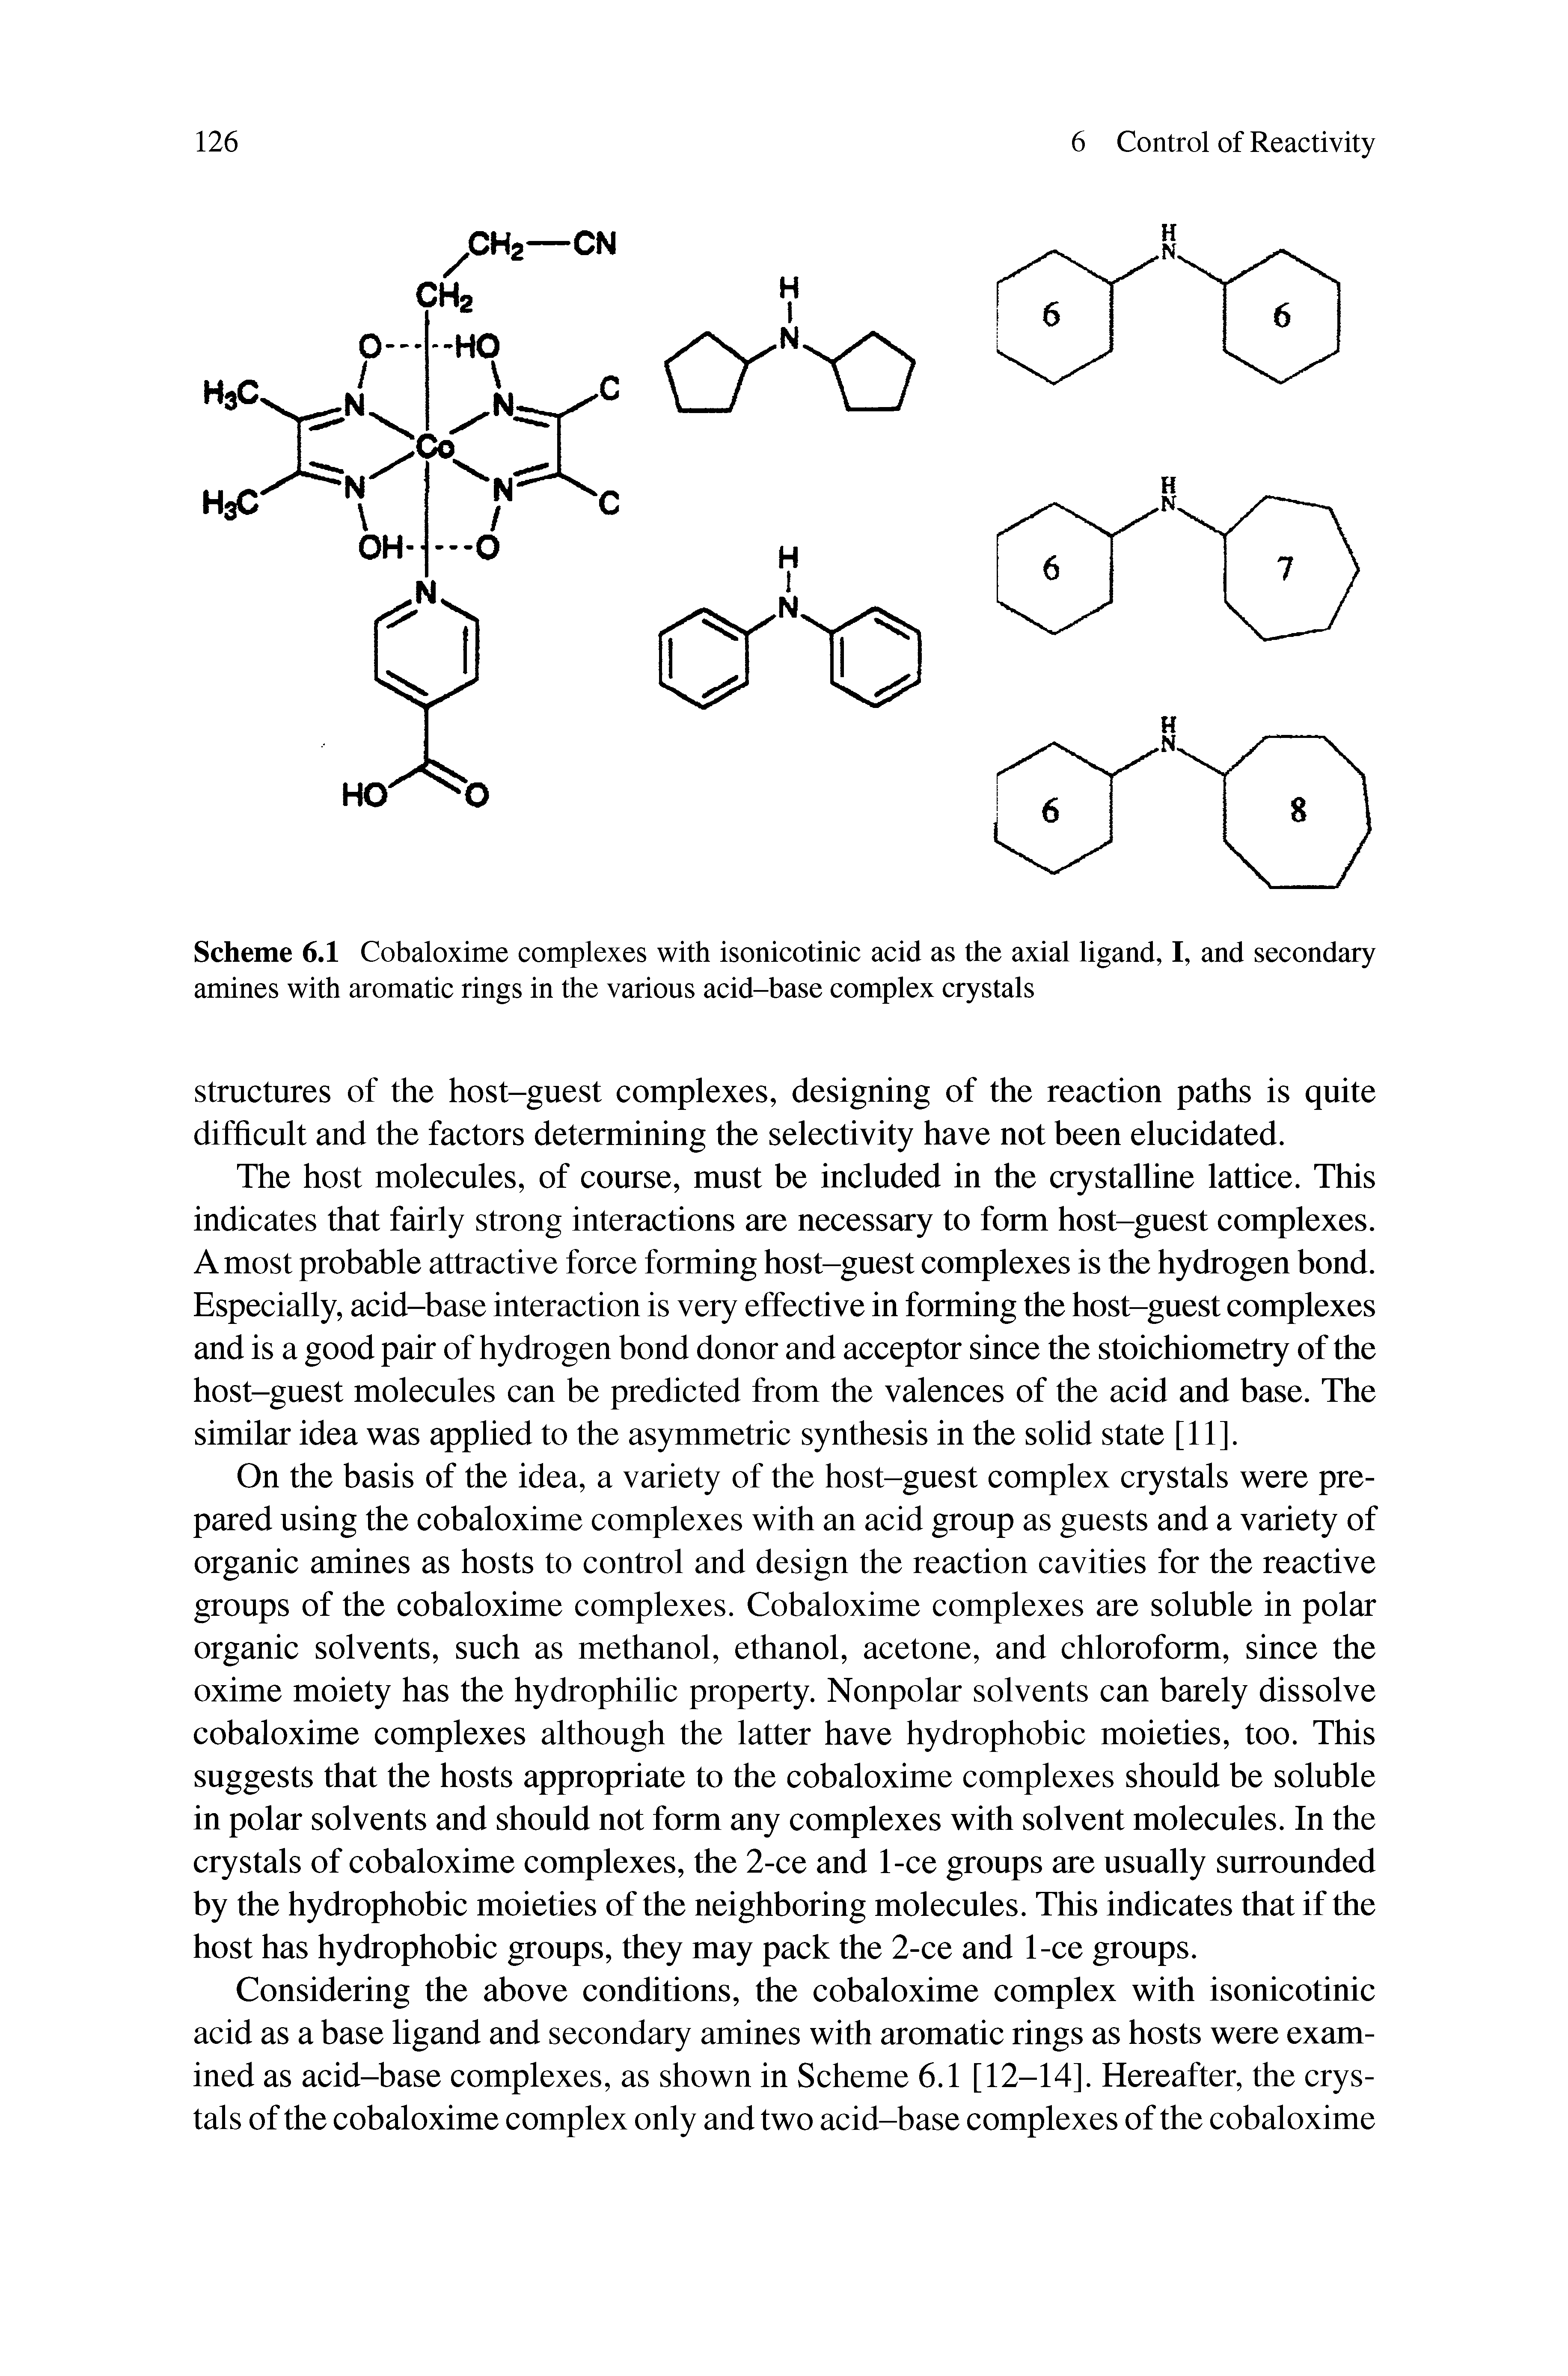 Scheme 6.1 Cobaloxime complexes with isonicotinic acid as the axial ligand, I, and secondary amines with aromatic rings in the various acid-base complex crystals...